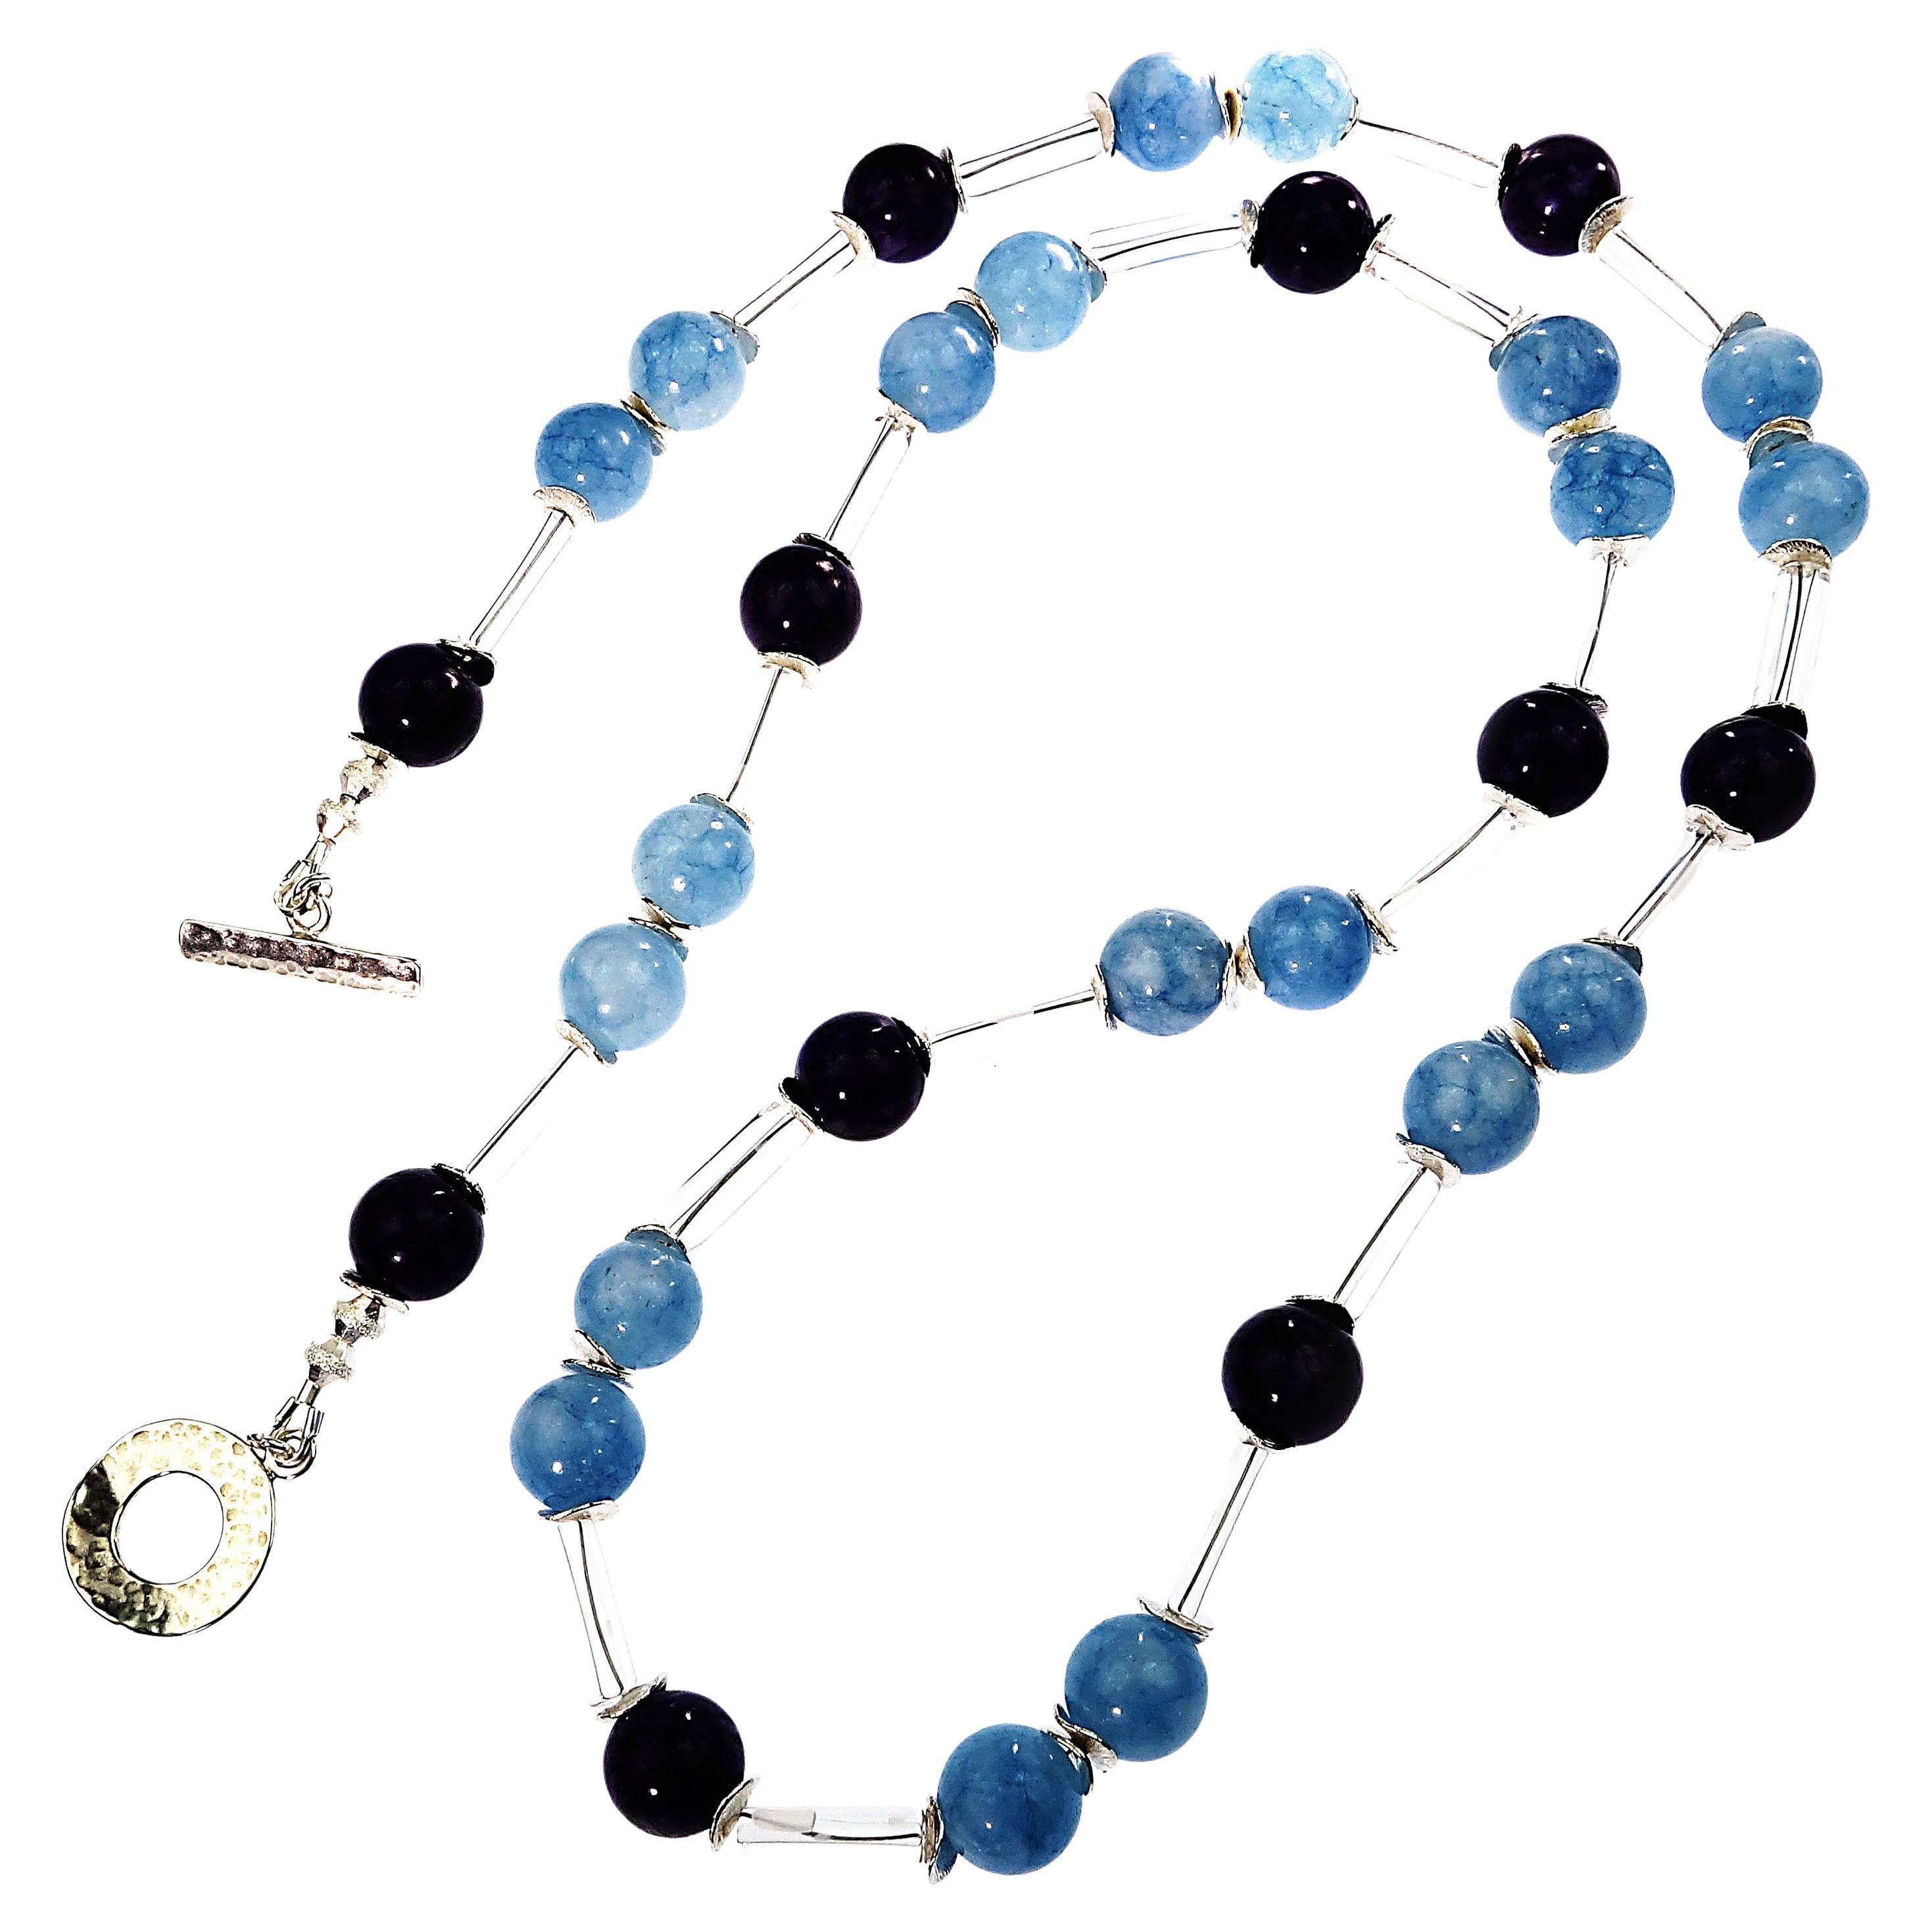 Delightful, unique, lightweight necklace featuring Aquamarine and Charoite spaced by clear crystal tubes. The lovely blue Aquamarine is accented with silver tone flutters, as is the glowing purple Charoite.  Wear this fun, fanciful necklace with all